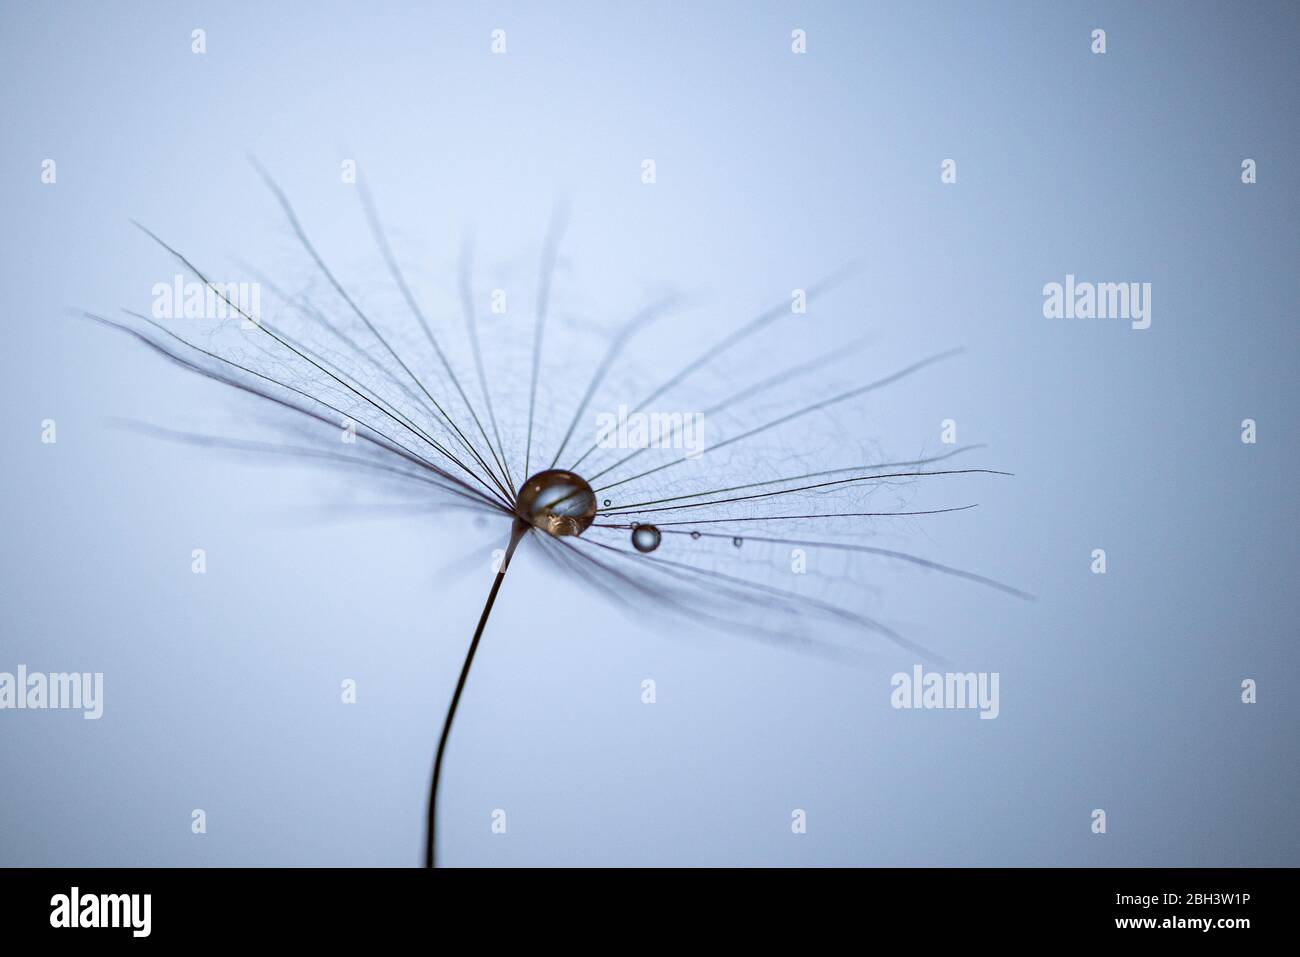 Dandelion, taraxacum, seeds with raindrops against a bright blue background in a studio. Macro, Selective focus. Stock Photo